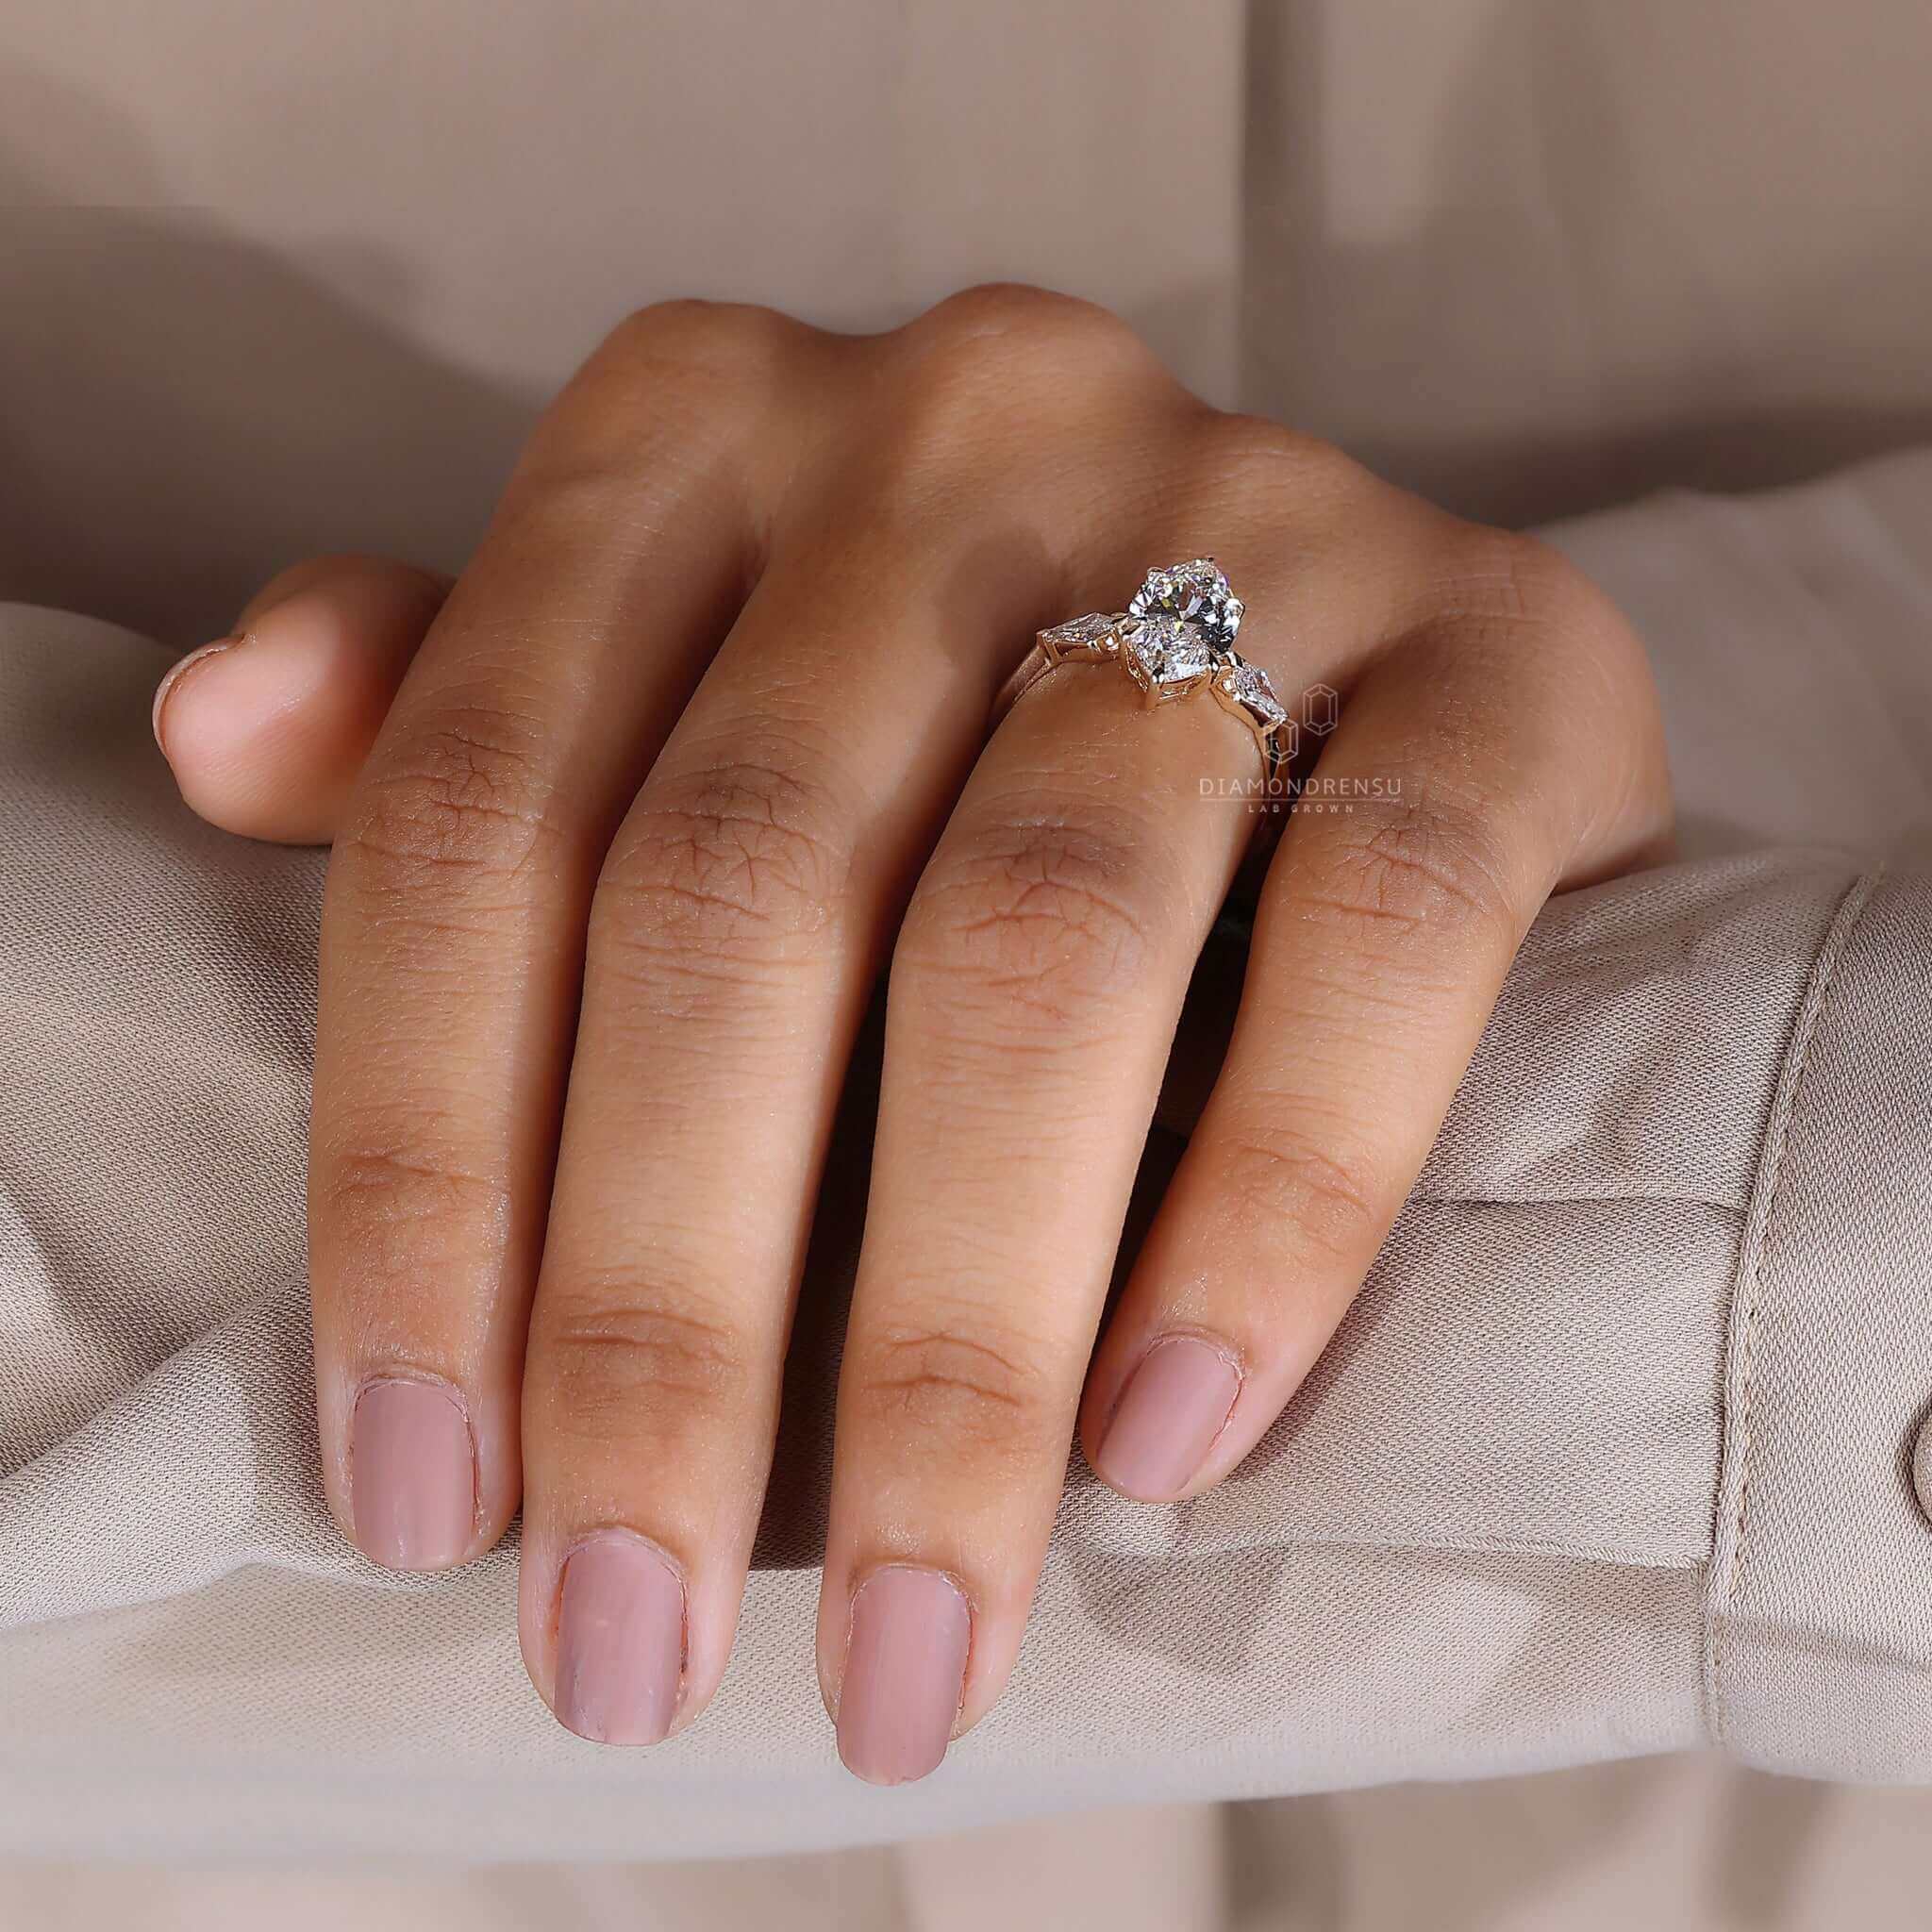 A woman's hand adorned with a unique and captivating diamond ring.